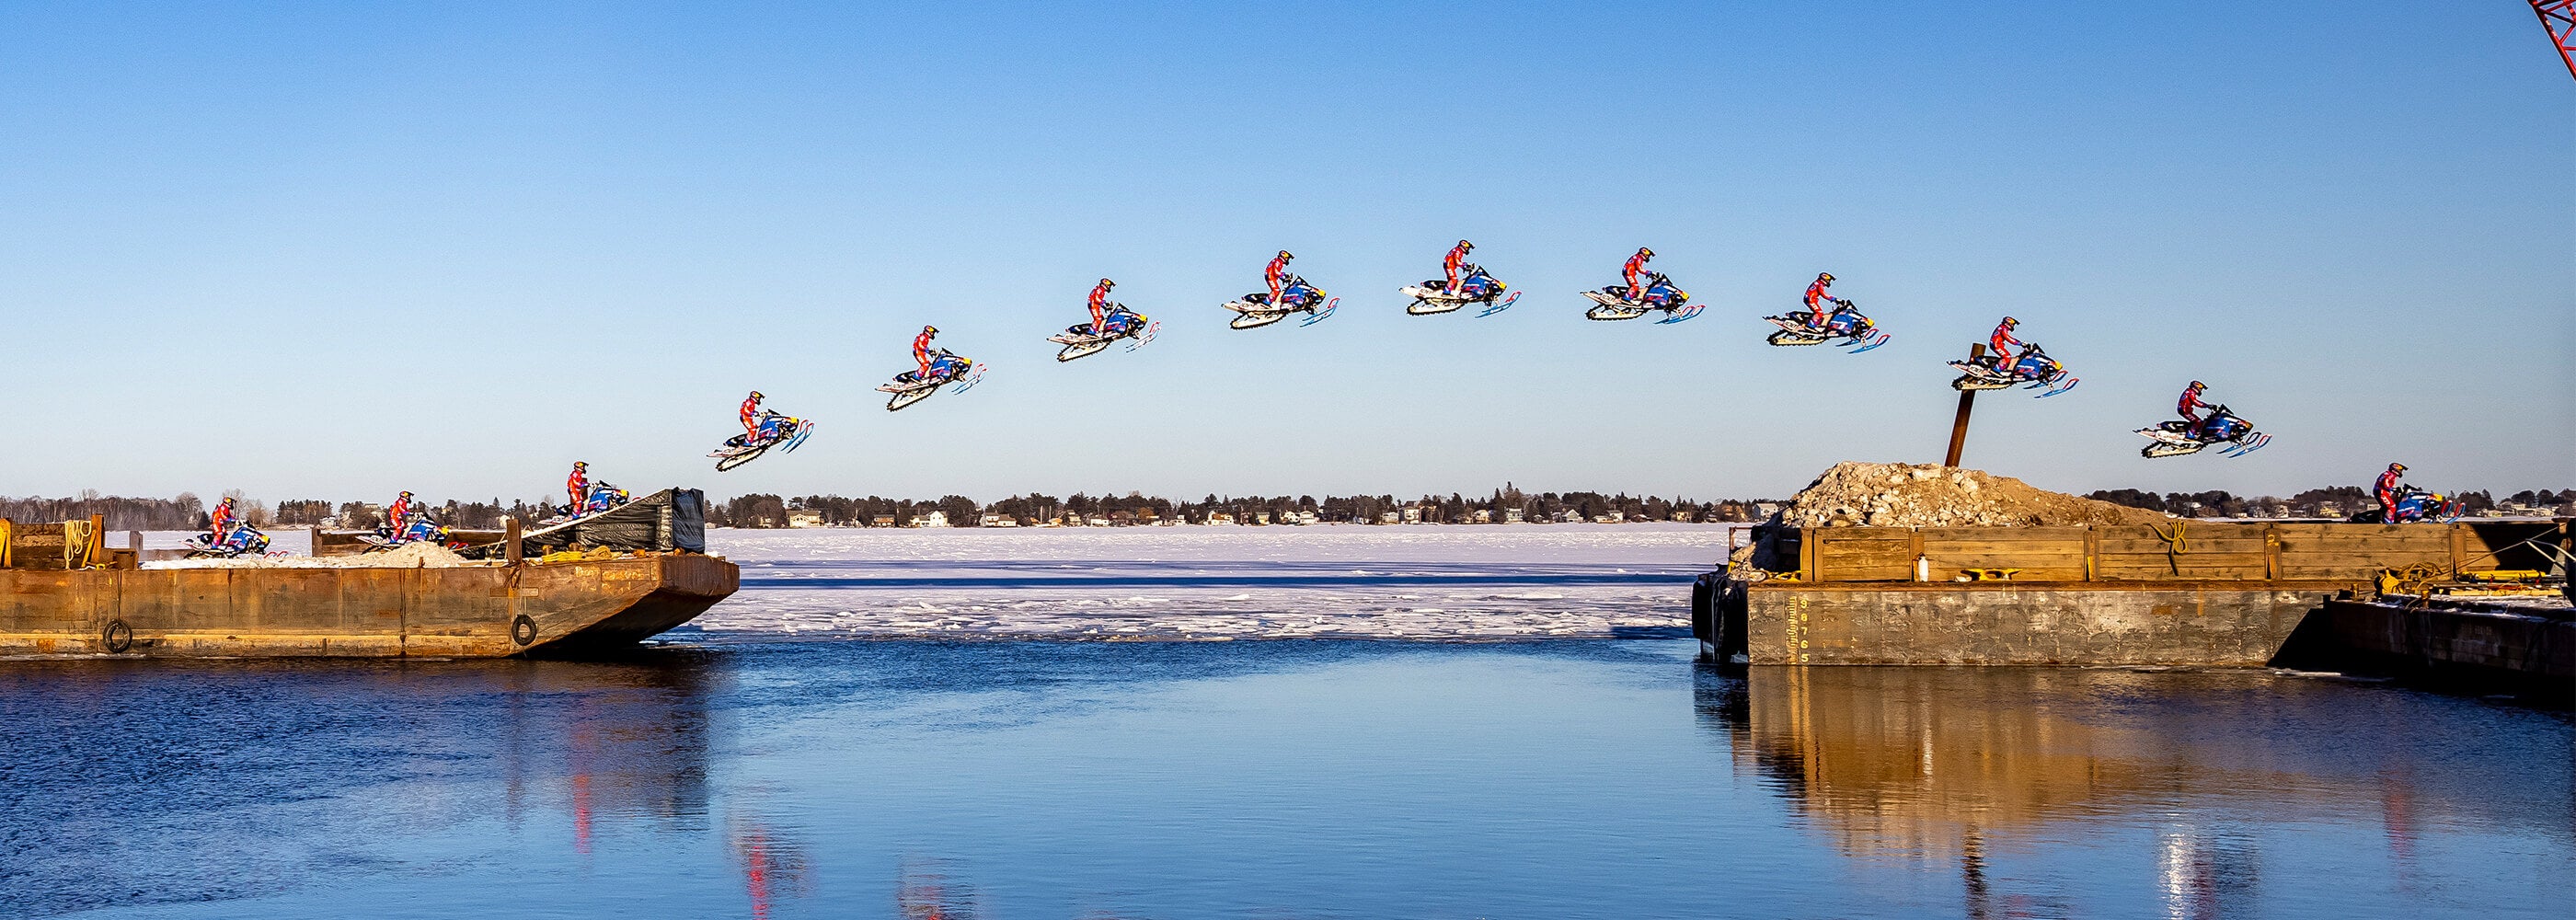 Professional freestyle snowmobile athlete Levi LaVallee jumps over canal in Duluth, Minnesota